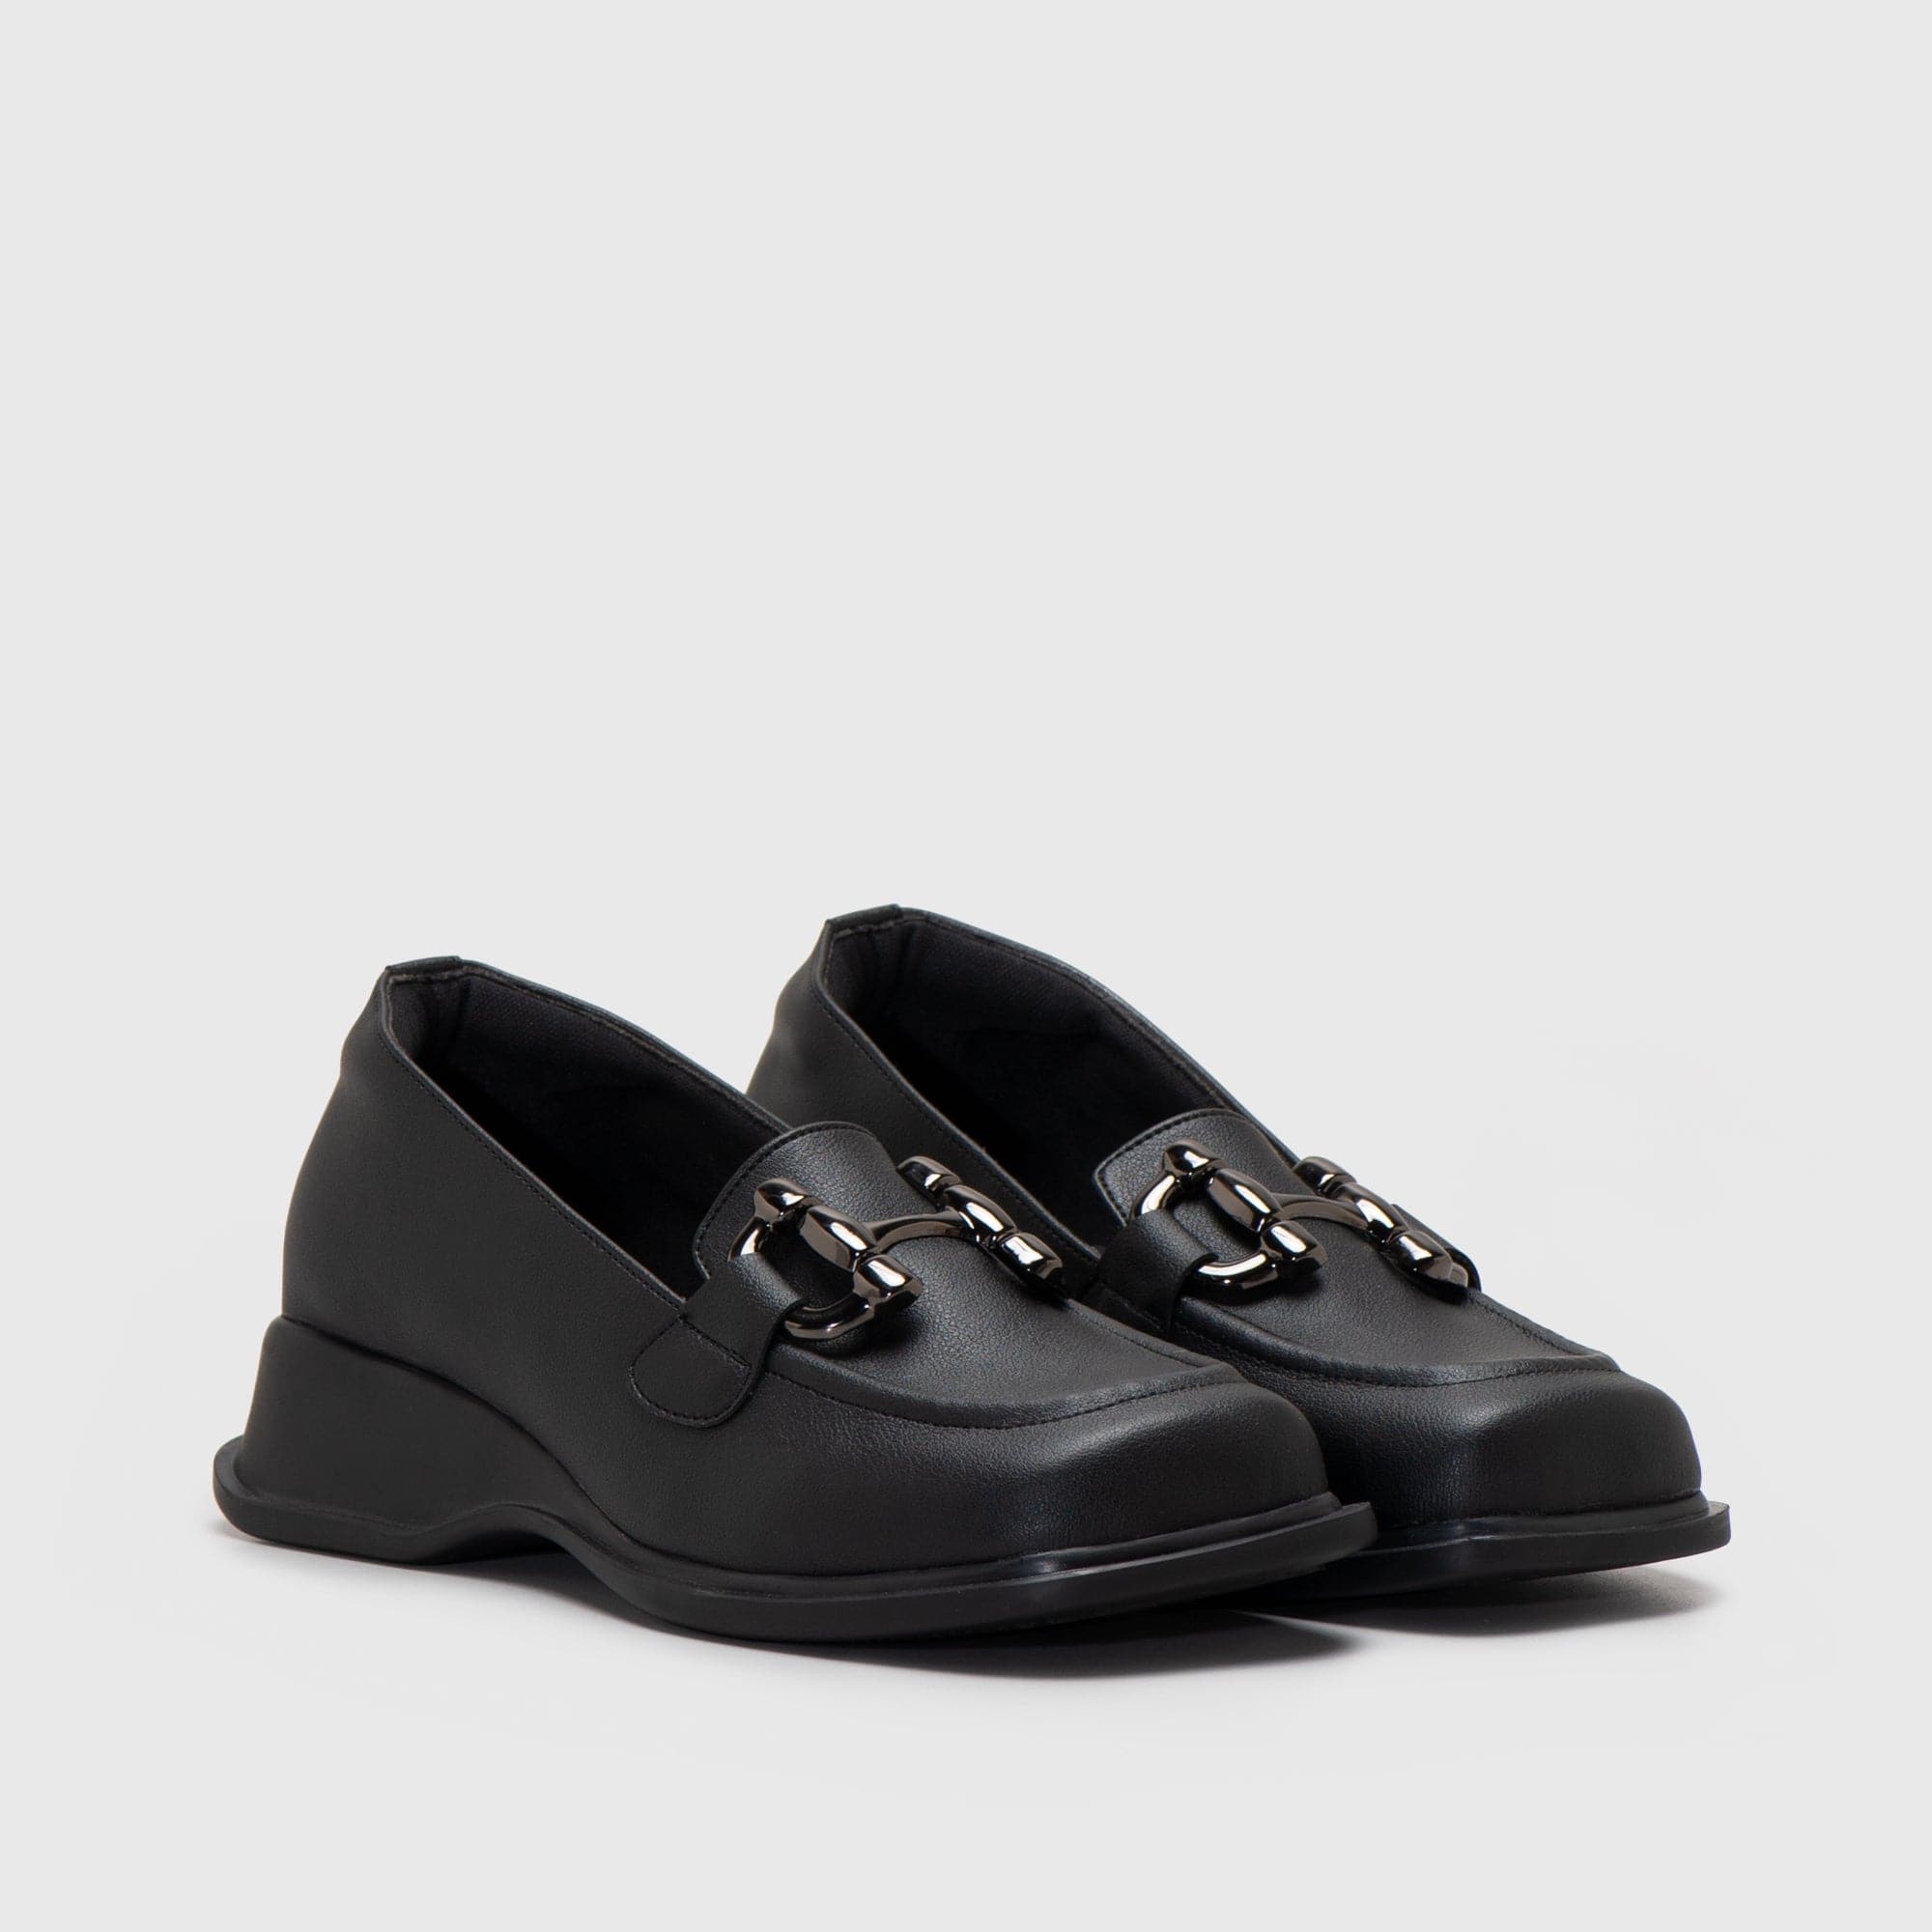 Adorable Projects Official Mini Heels 36 / Black Runna Loafer Black